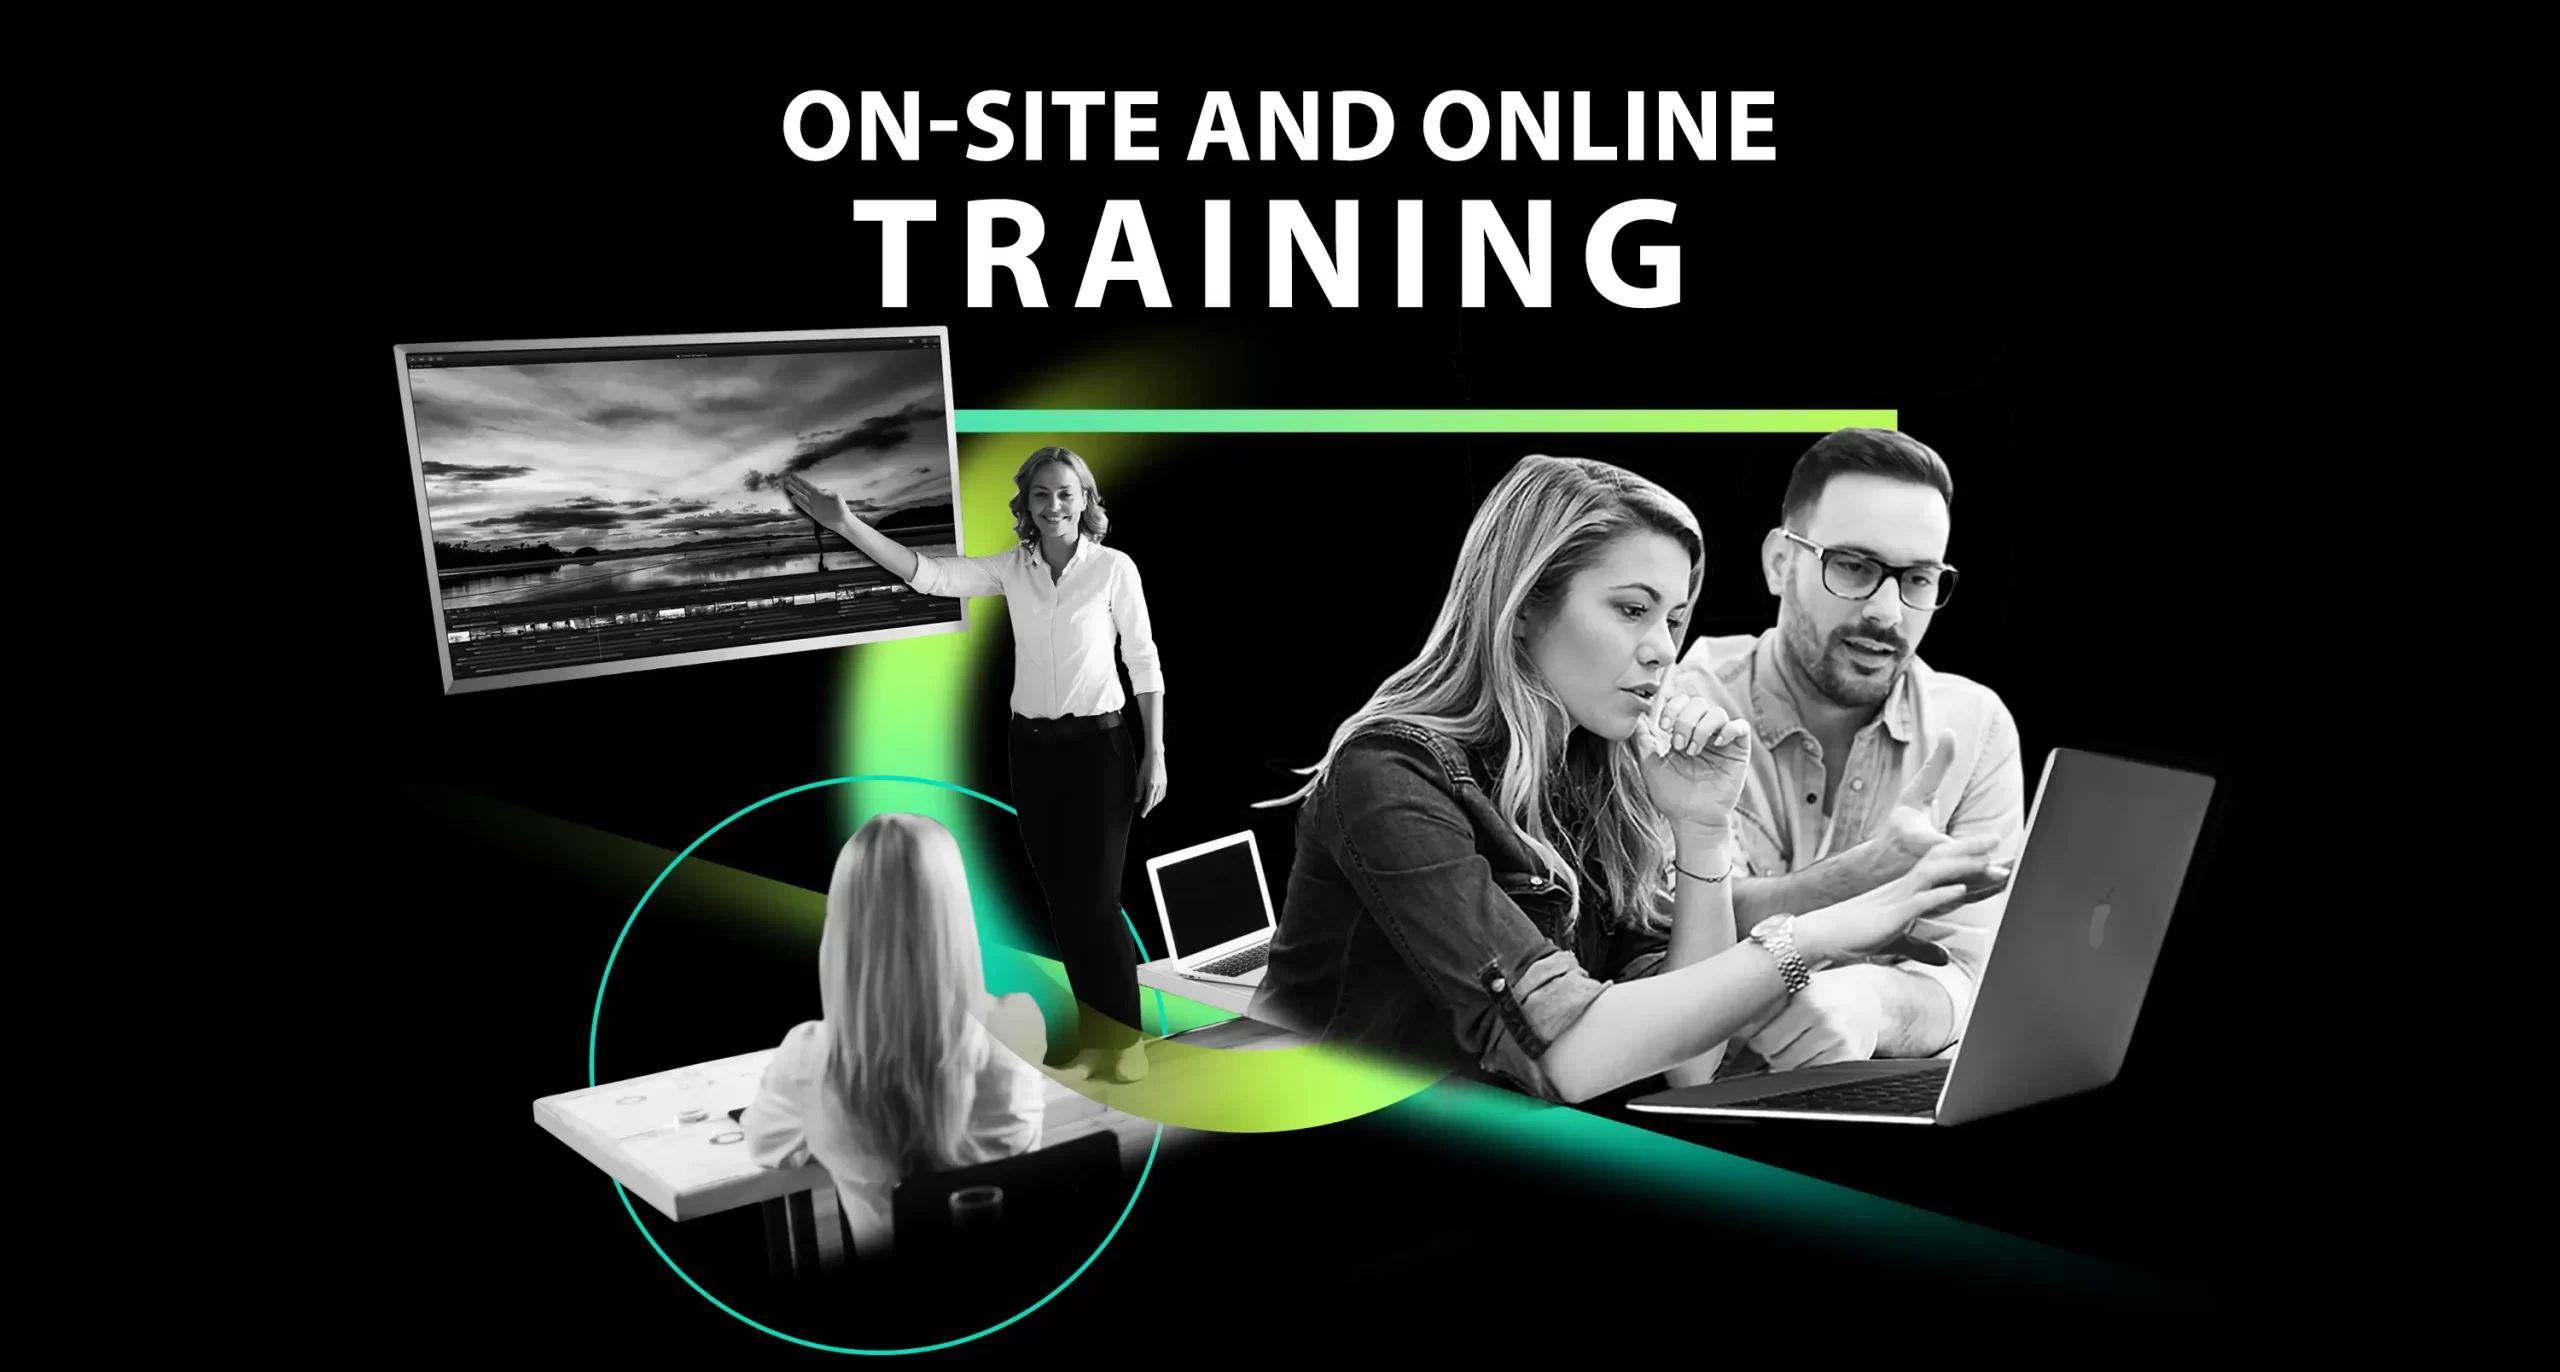 On-Site and Online Training - image collage